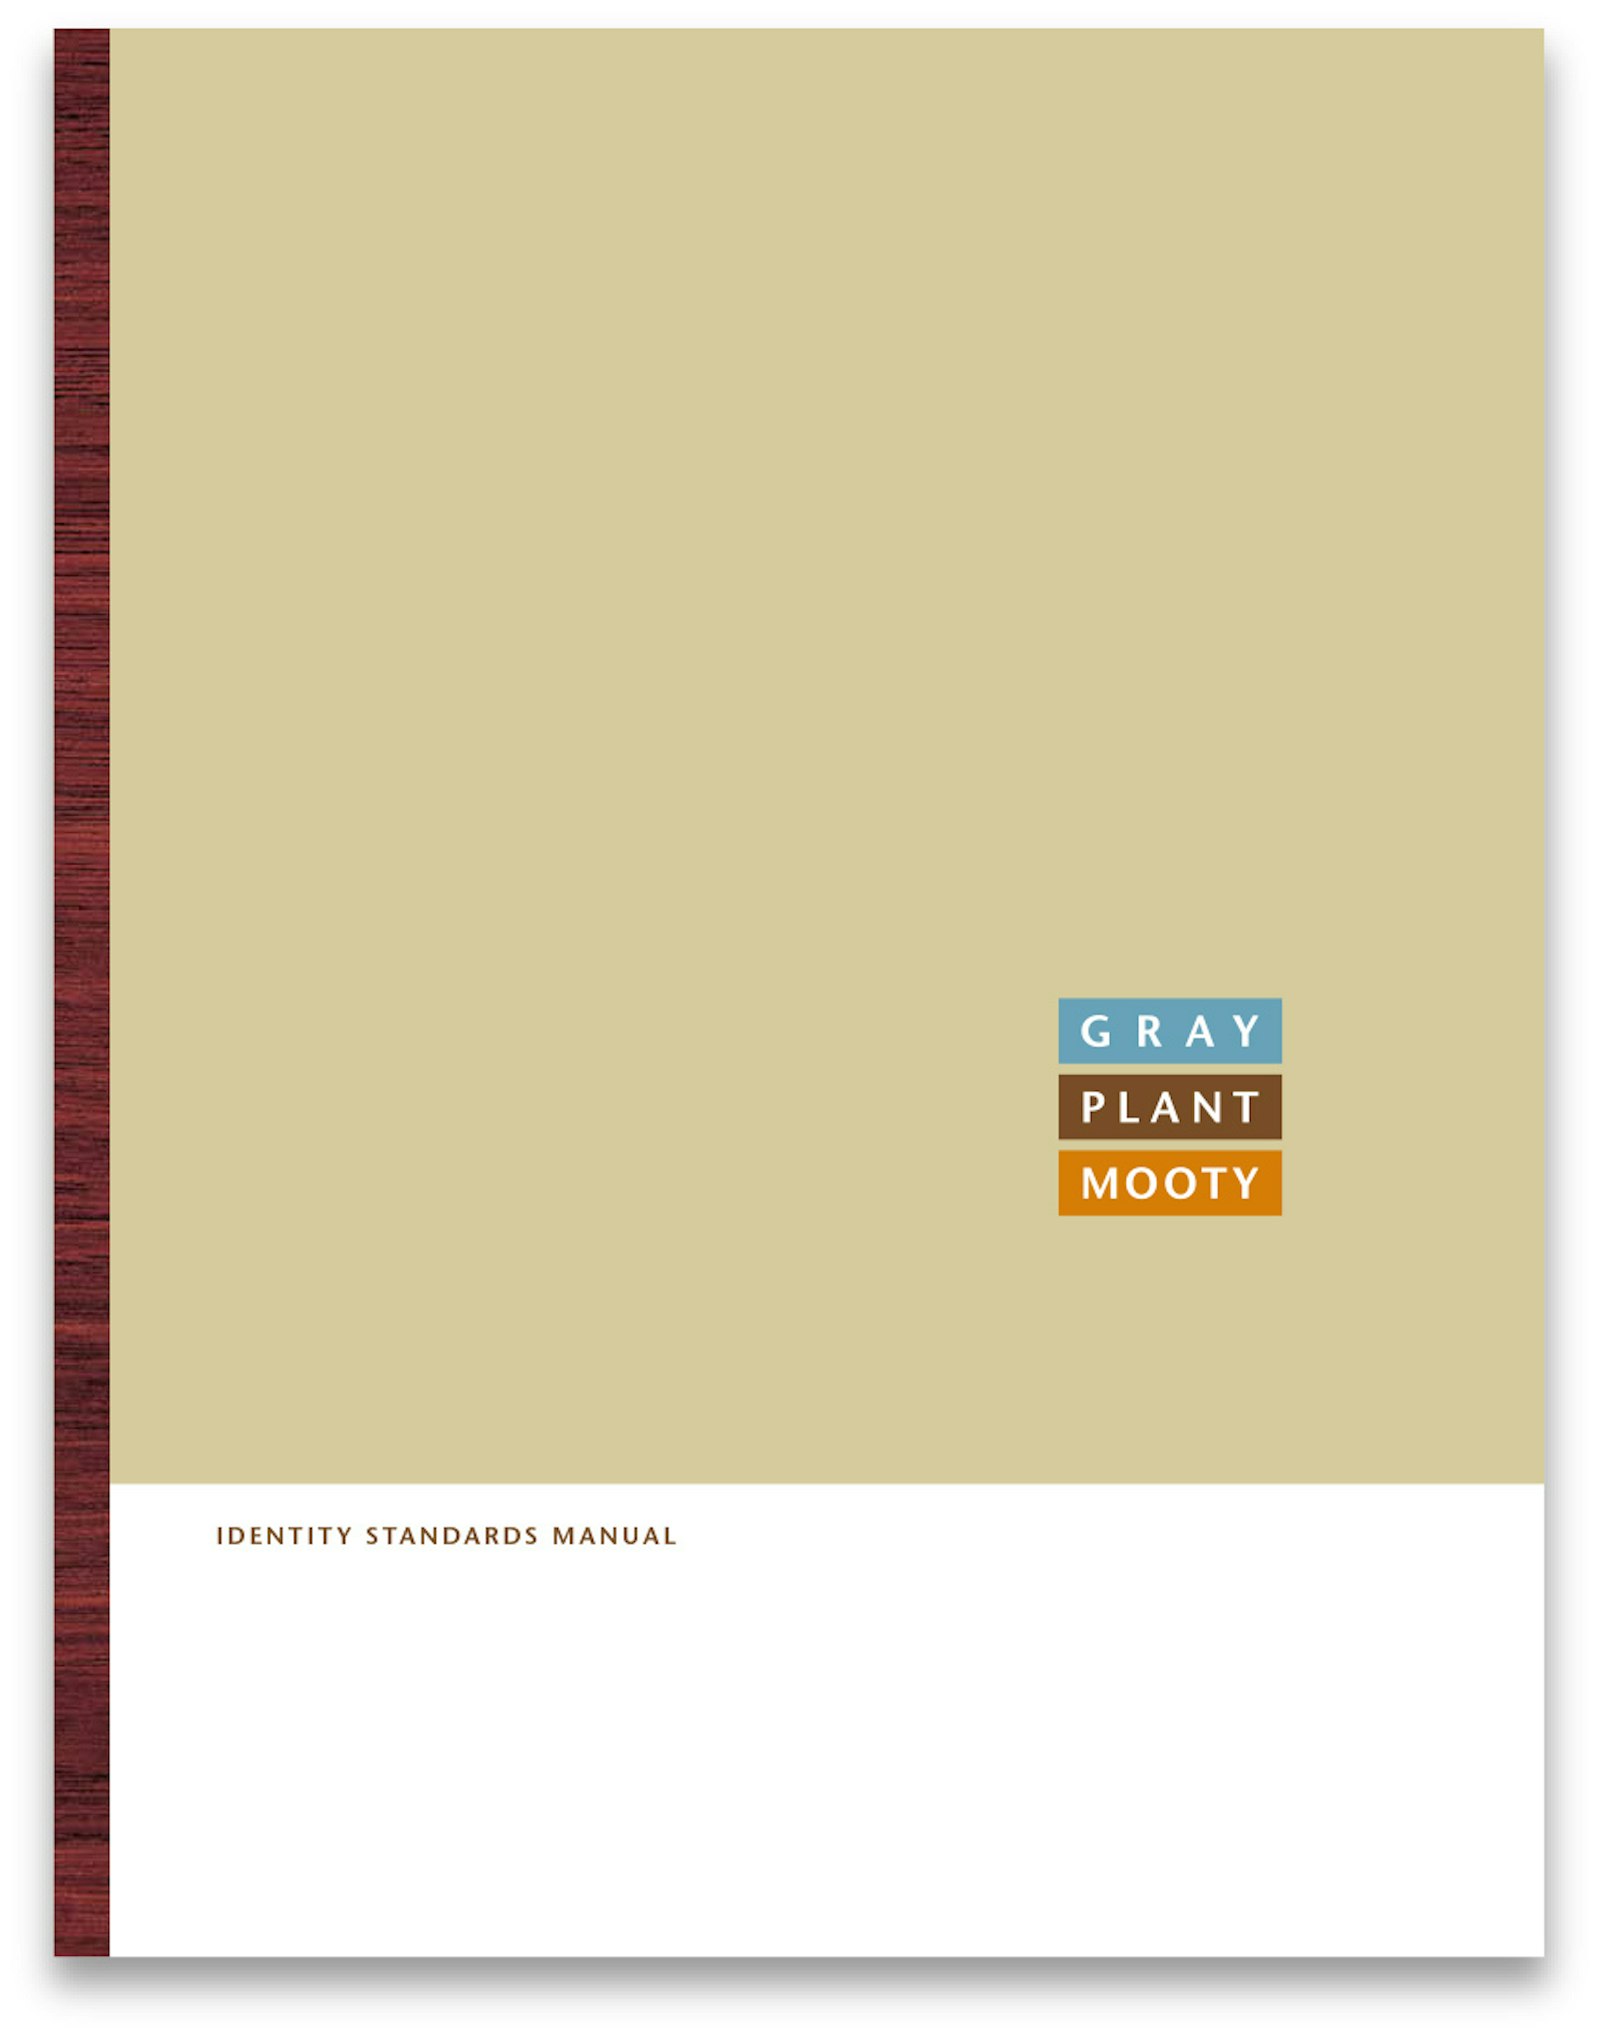 A cover of a Gray Plant Mooty brand identity standards manual.